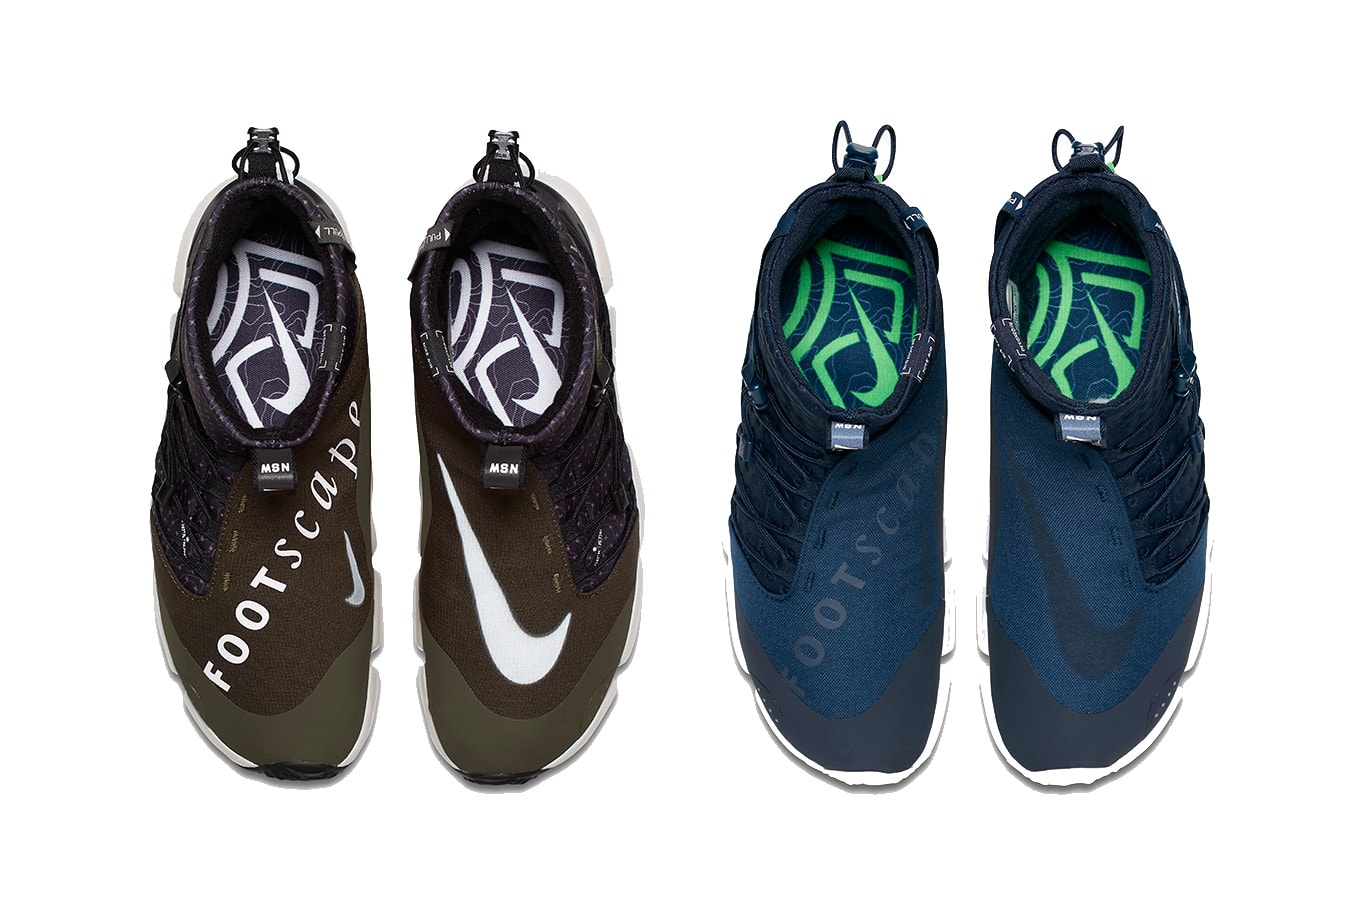 Nike Air Footscape Mid Utility spring 2018 release info new colorways purchase